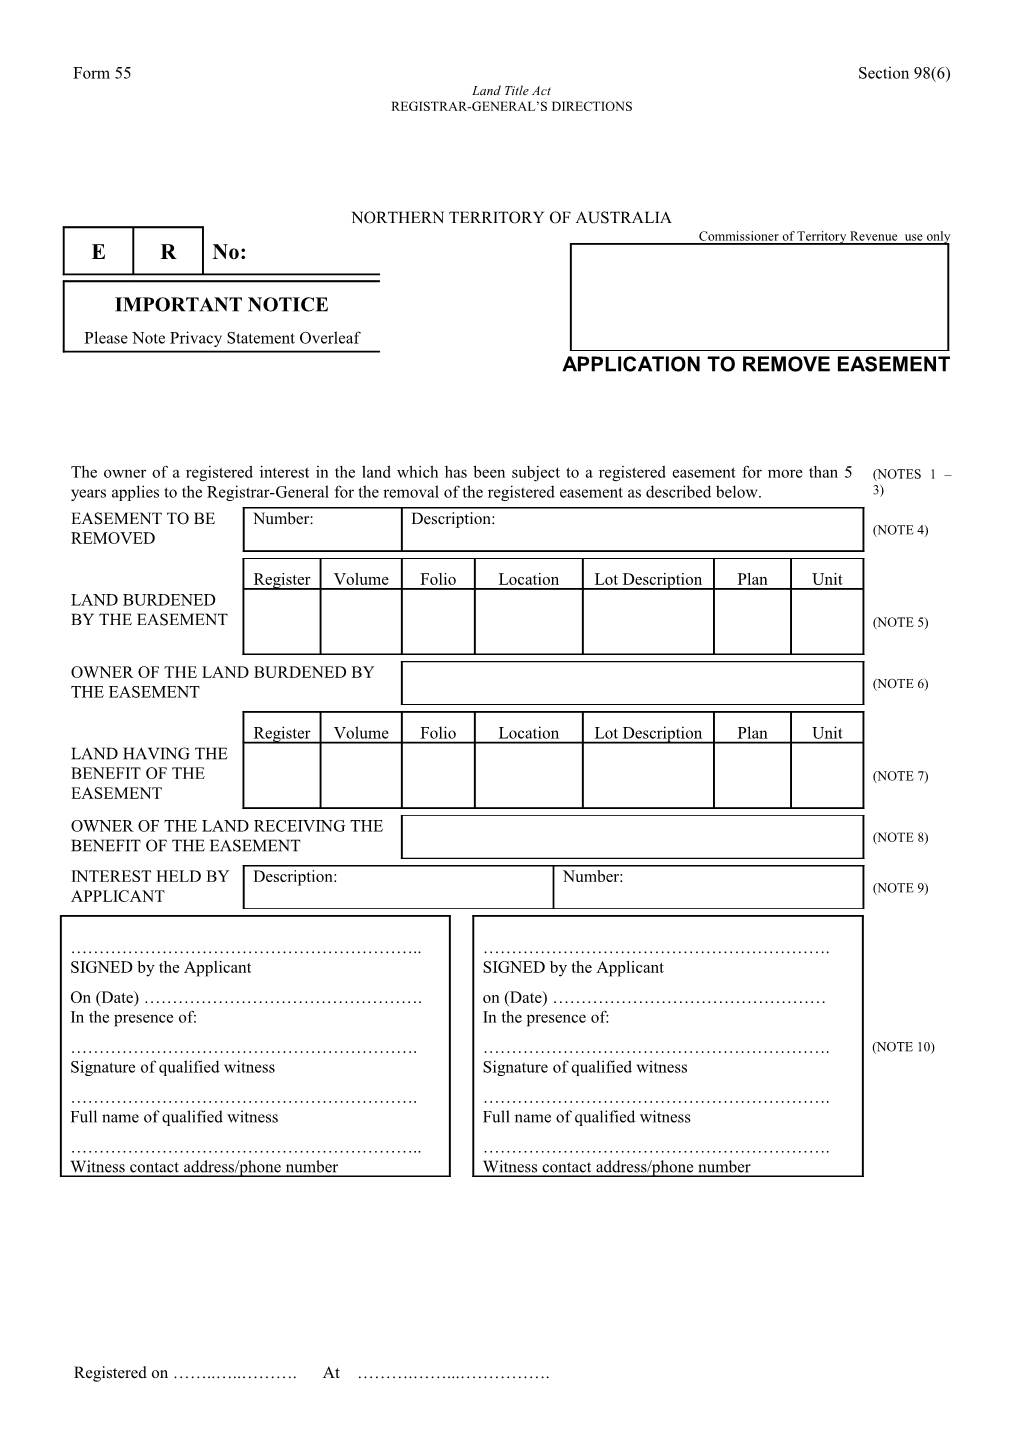 Form No. 55 - Application to Remove Easement